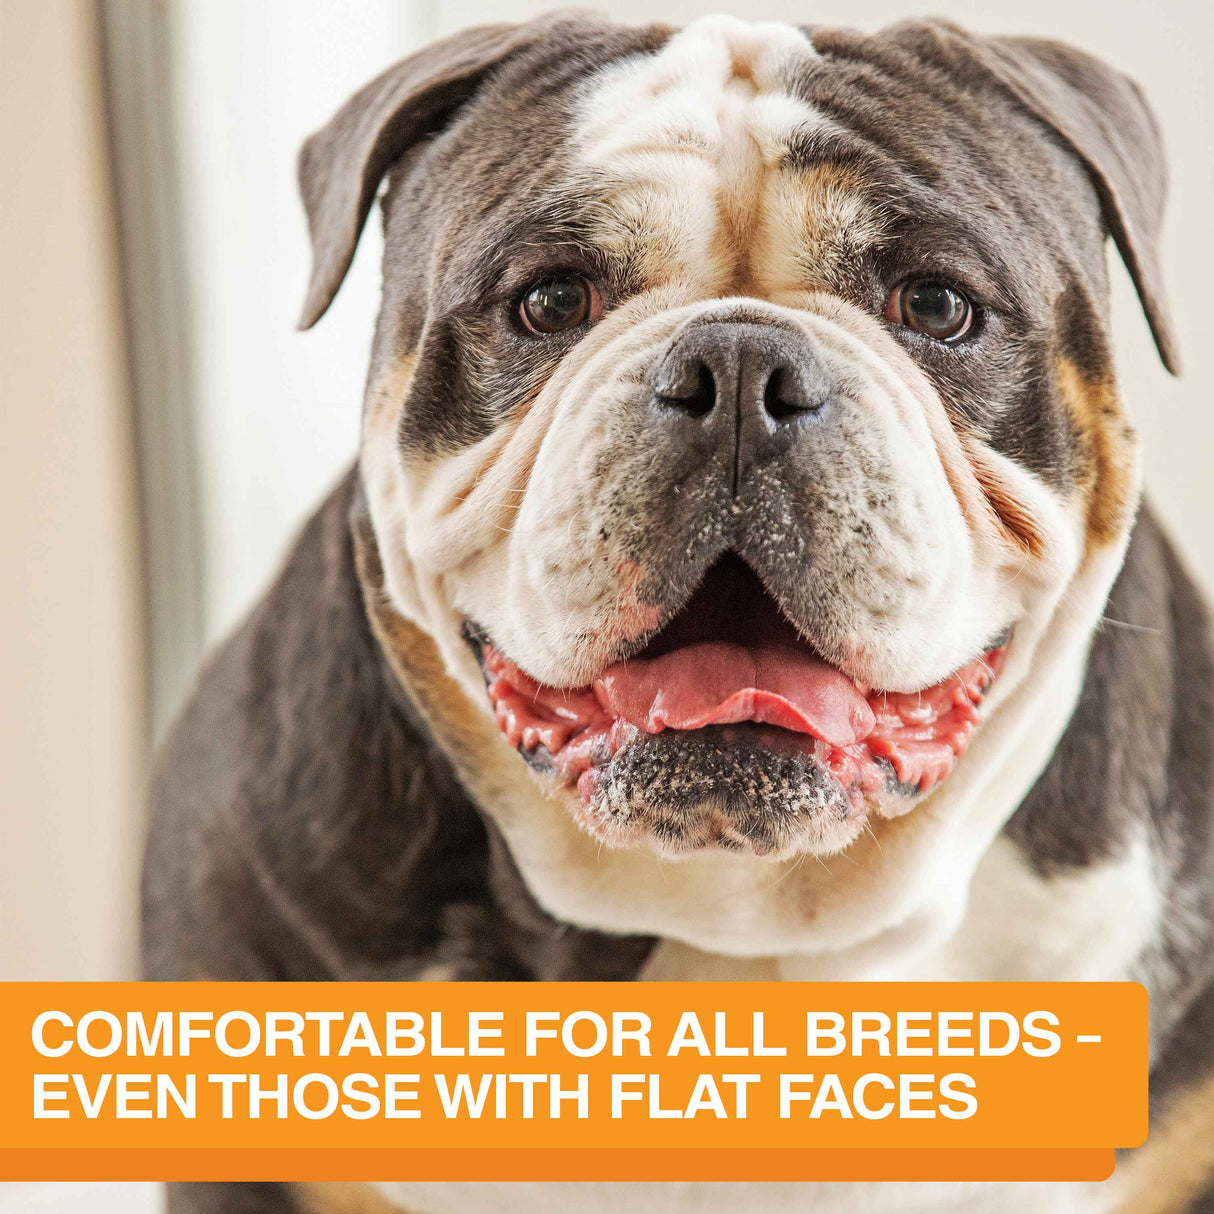 Niner is comfortable for flat faced breeds